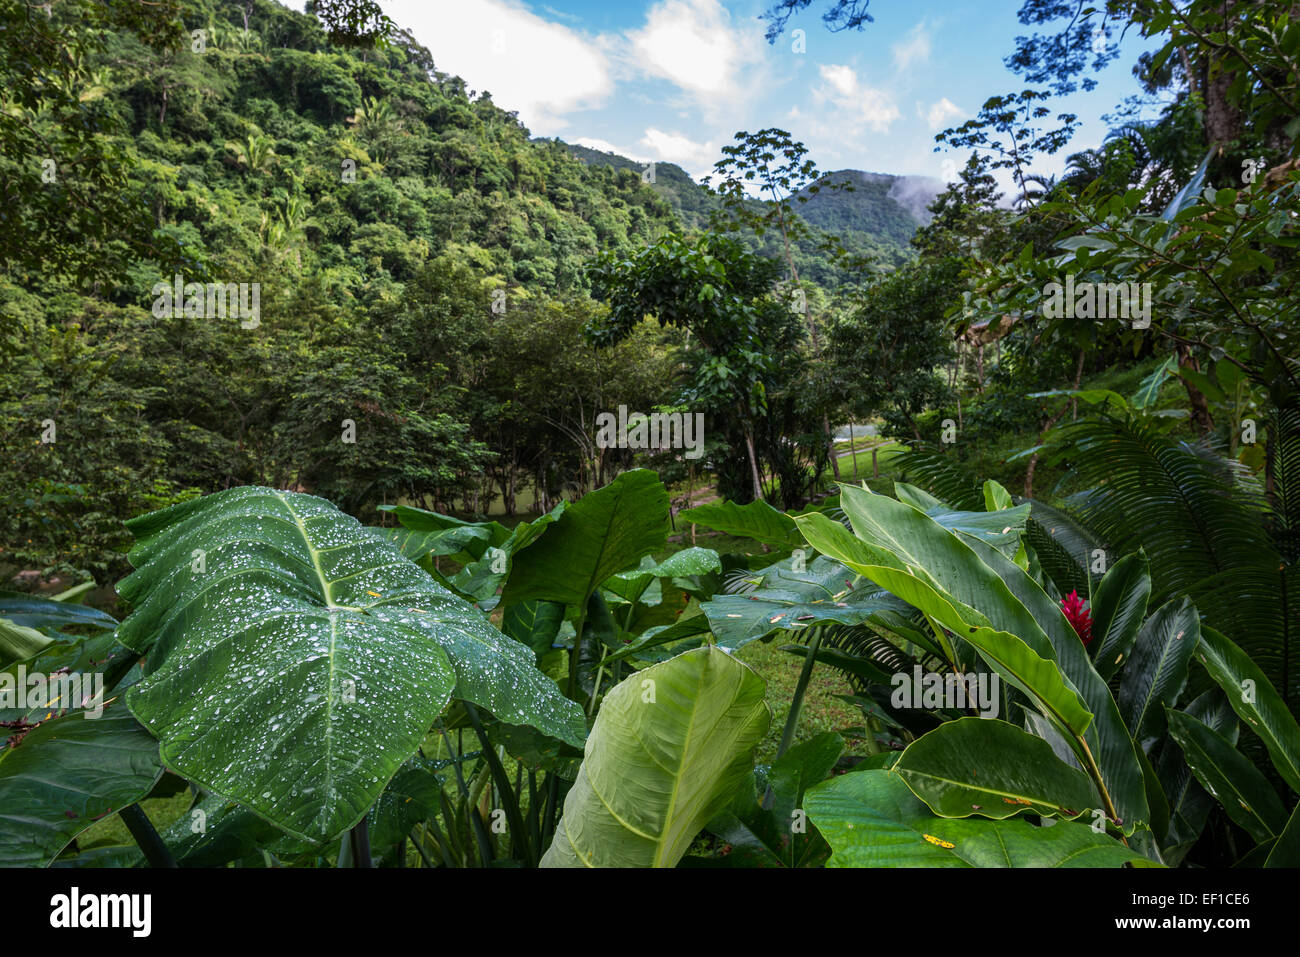 A garden in lush green jungles of Belize, Central America. Stock Photo